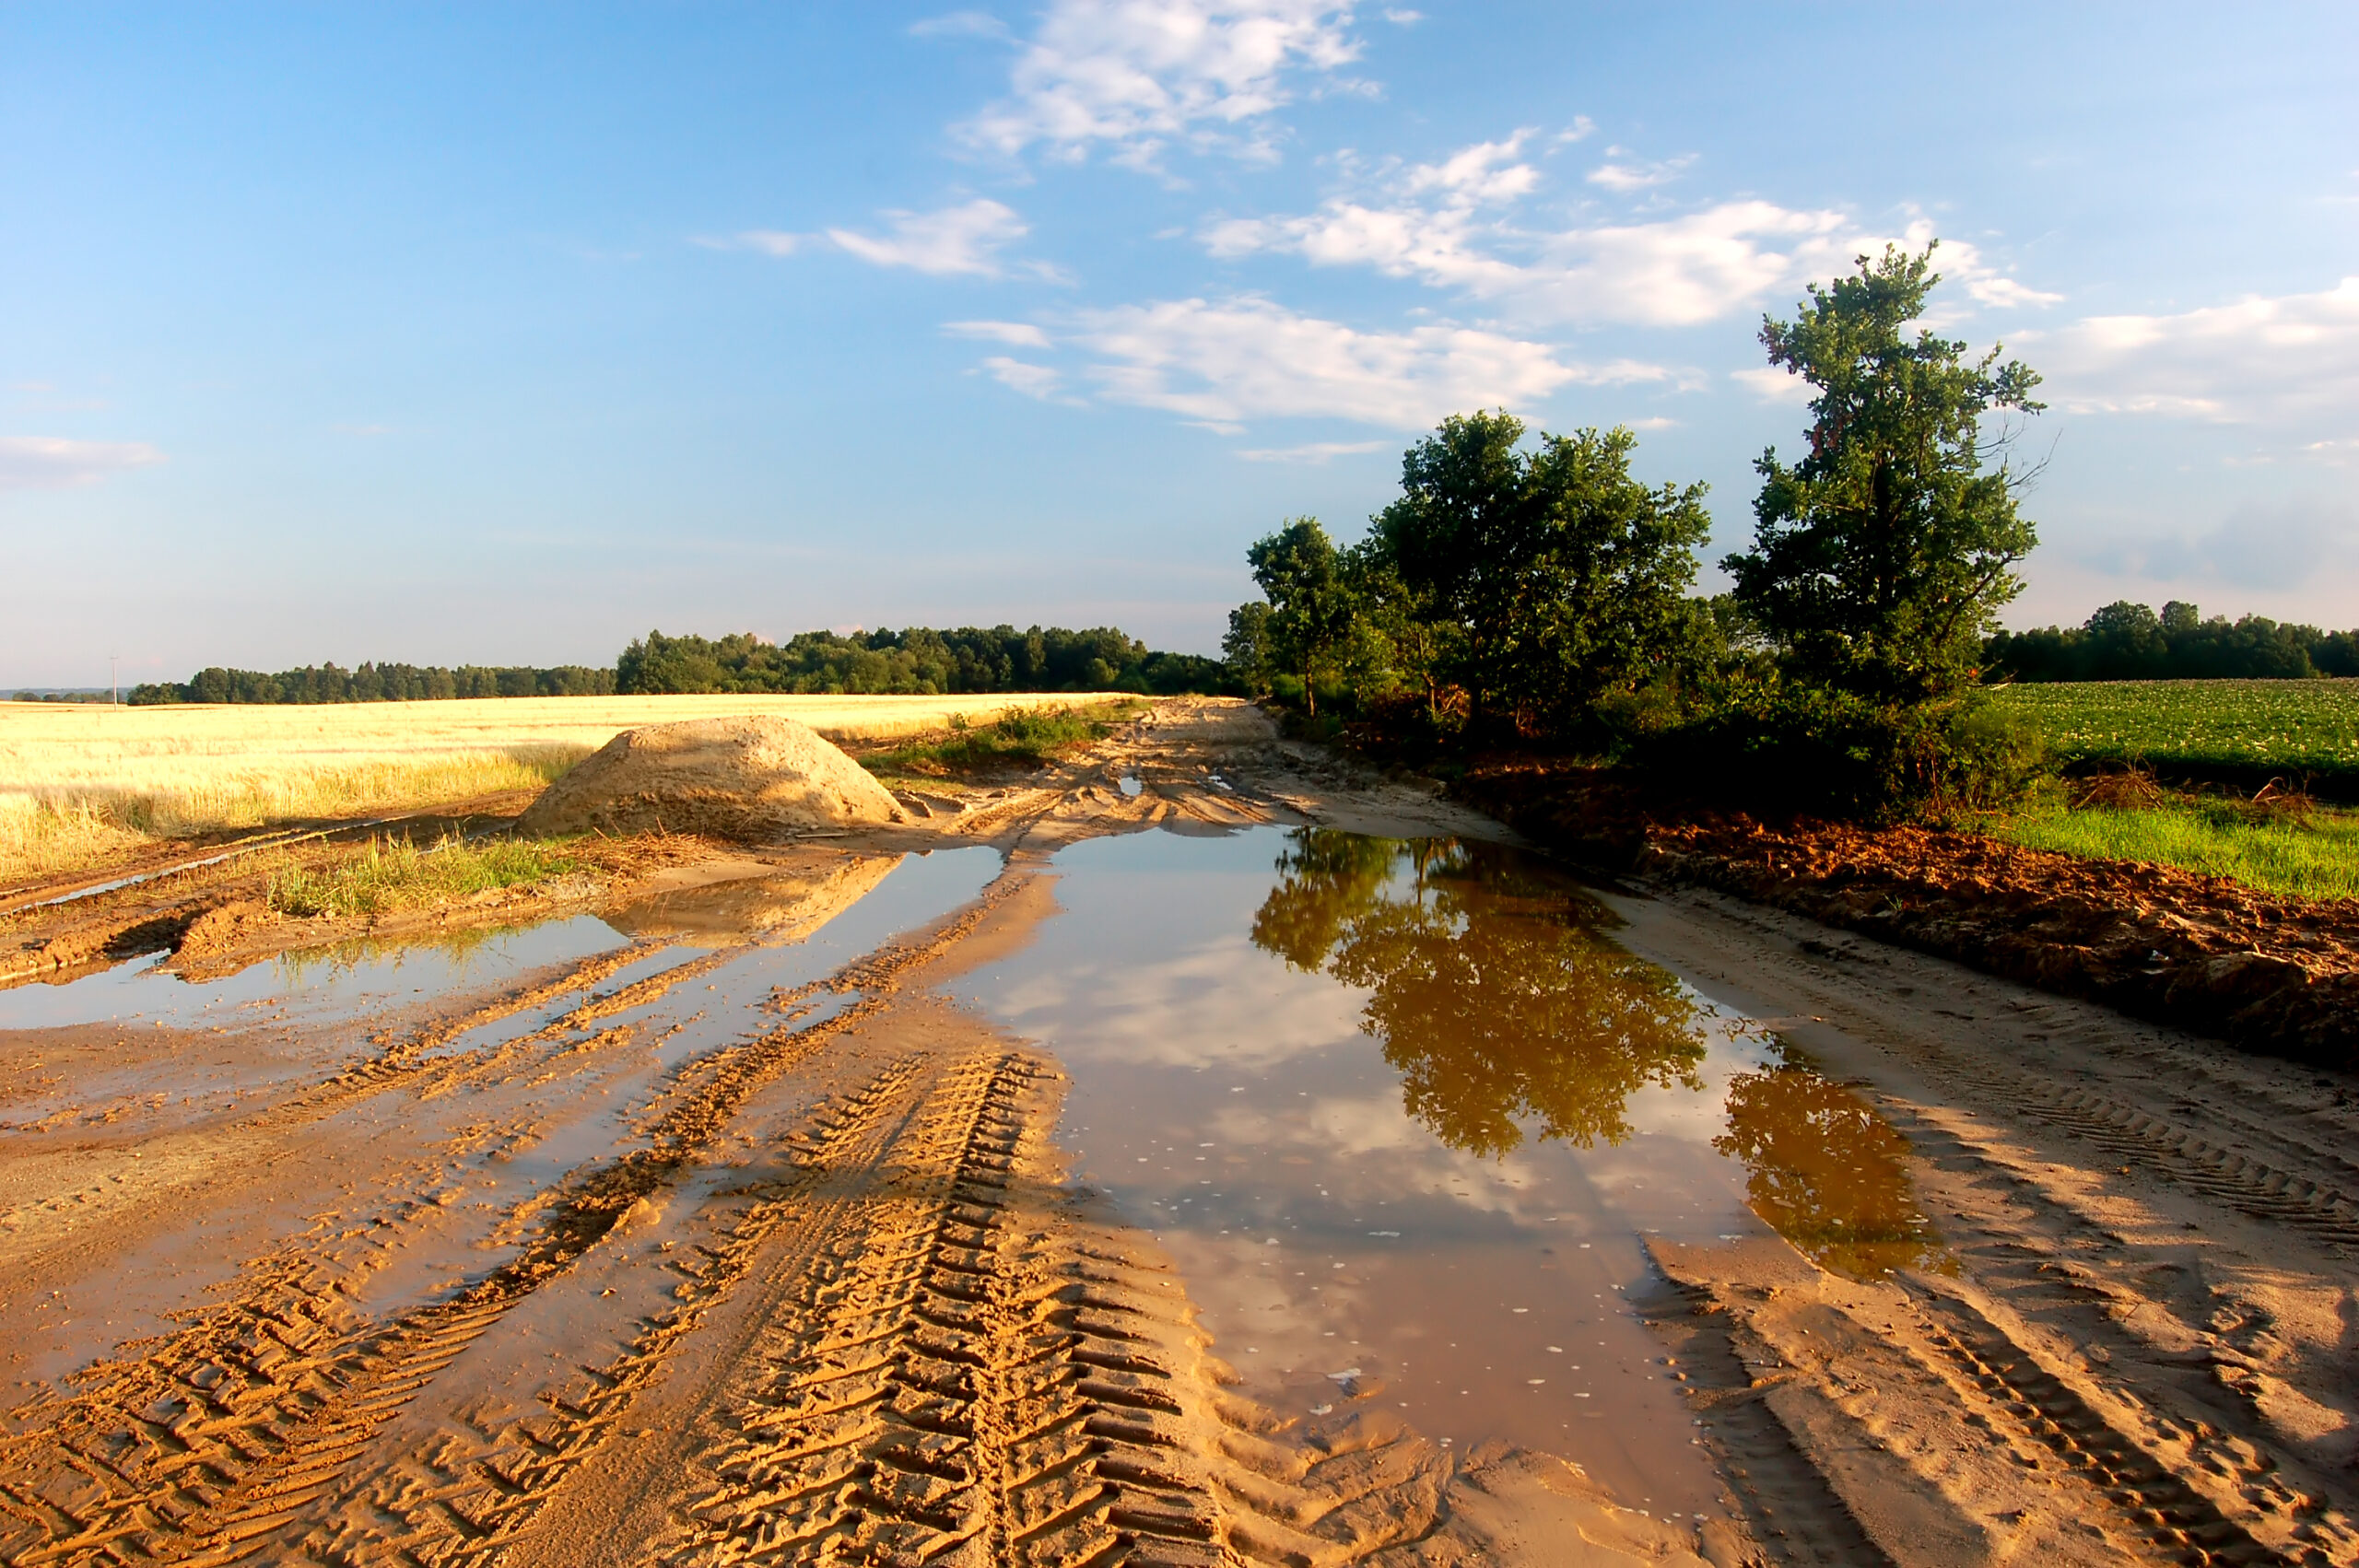 A muddy off-roading environment with puddles of water.